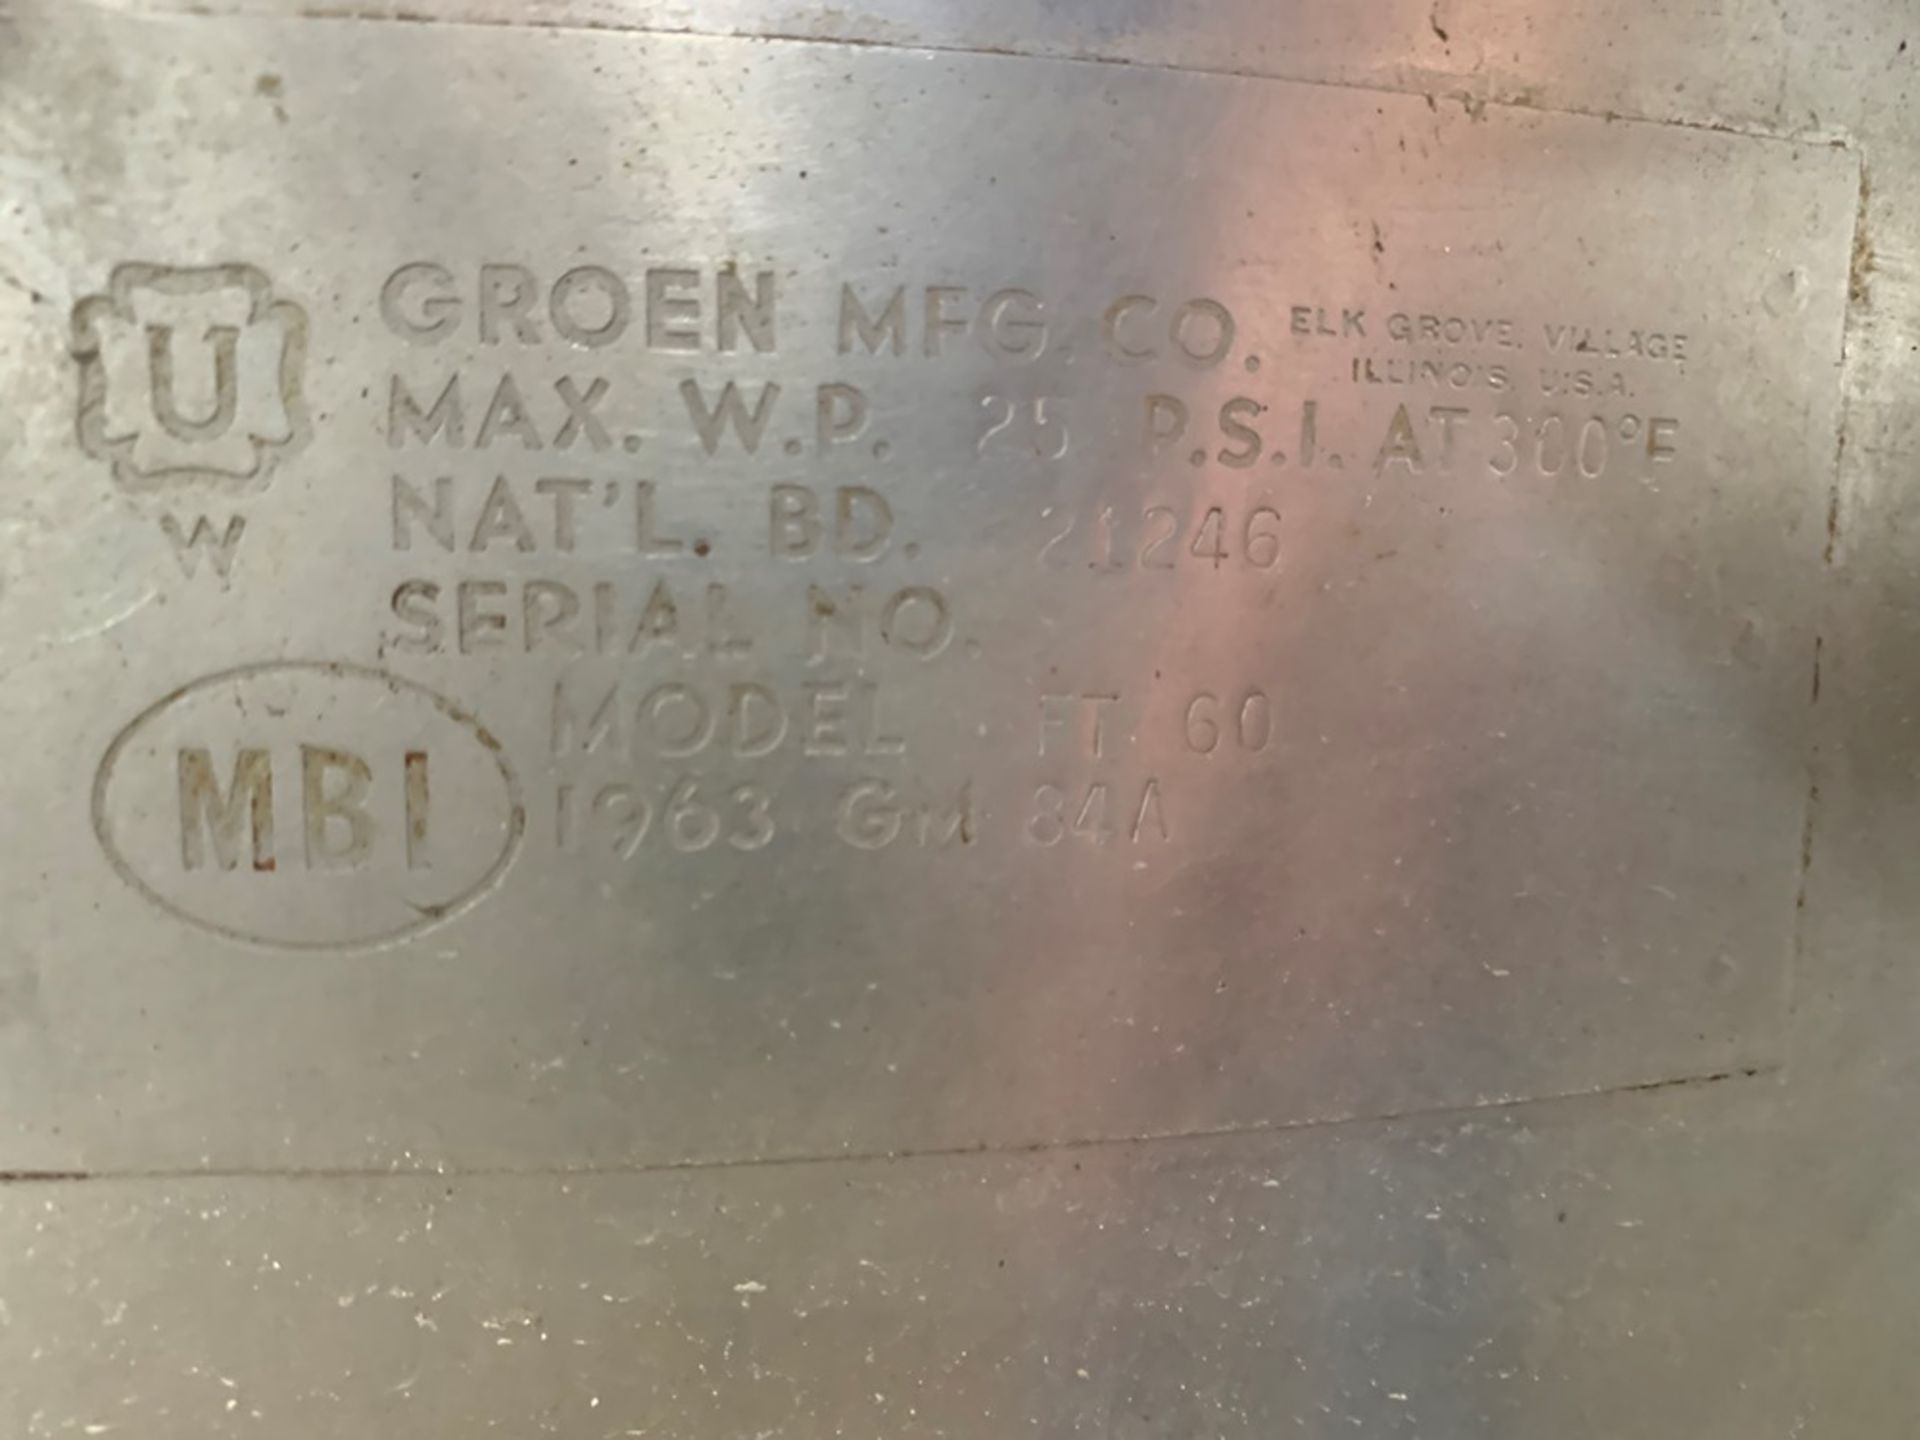 Groen Mdl. FT60 Kettle, 25 psi, Nat. Board #21246 (Located in Plano, IL) - Image 6 of 6